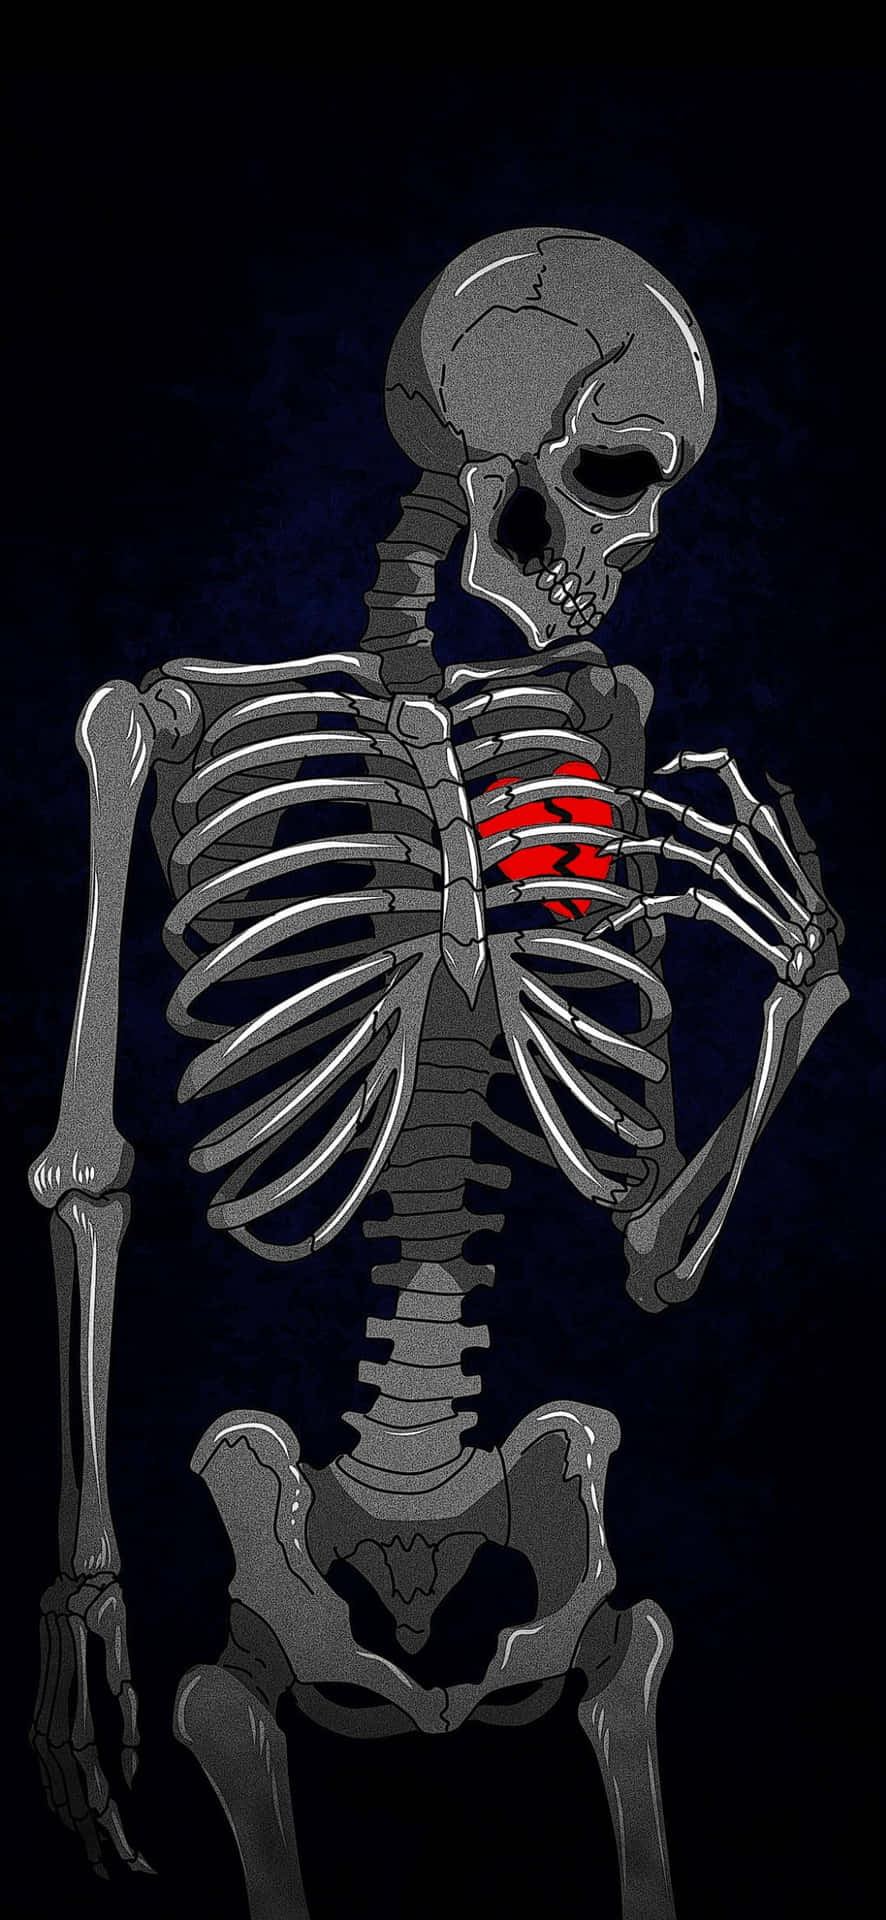 A Skeleton With A Red Heart On His Chest